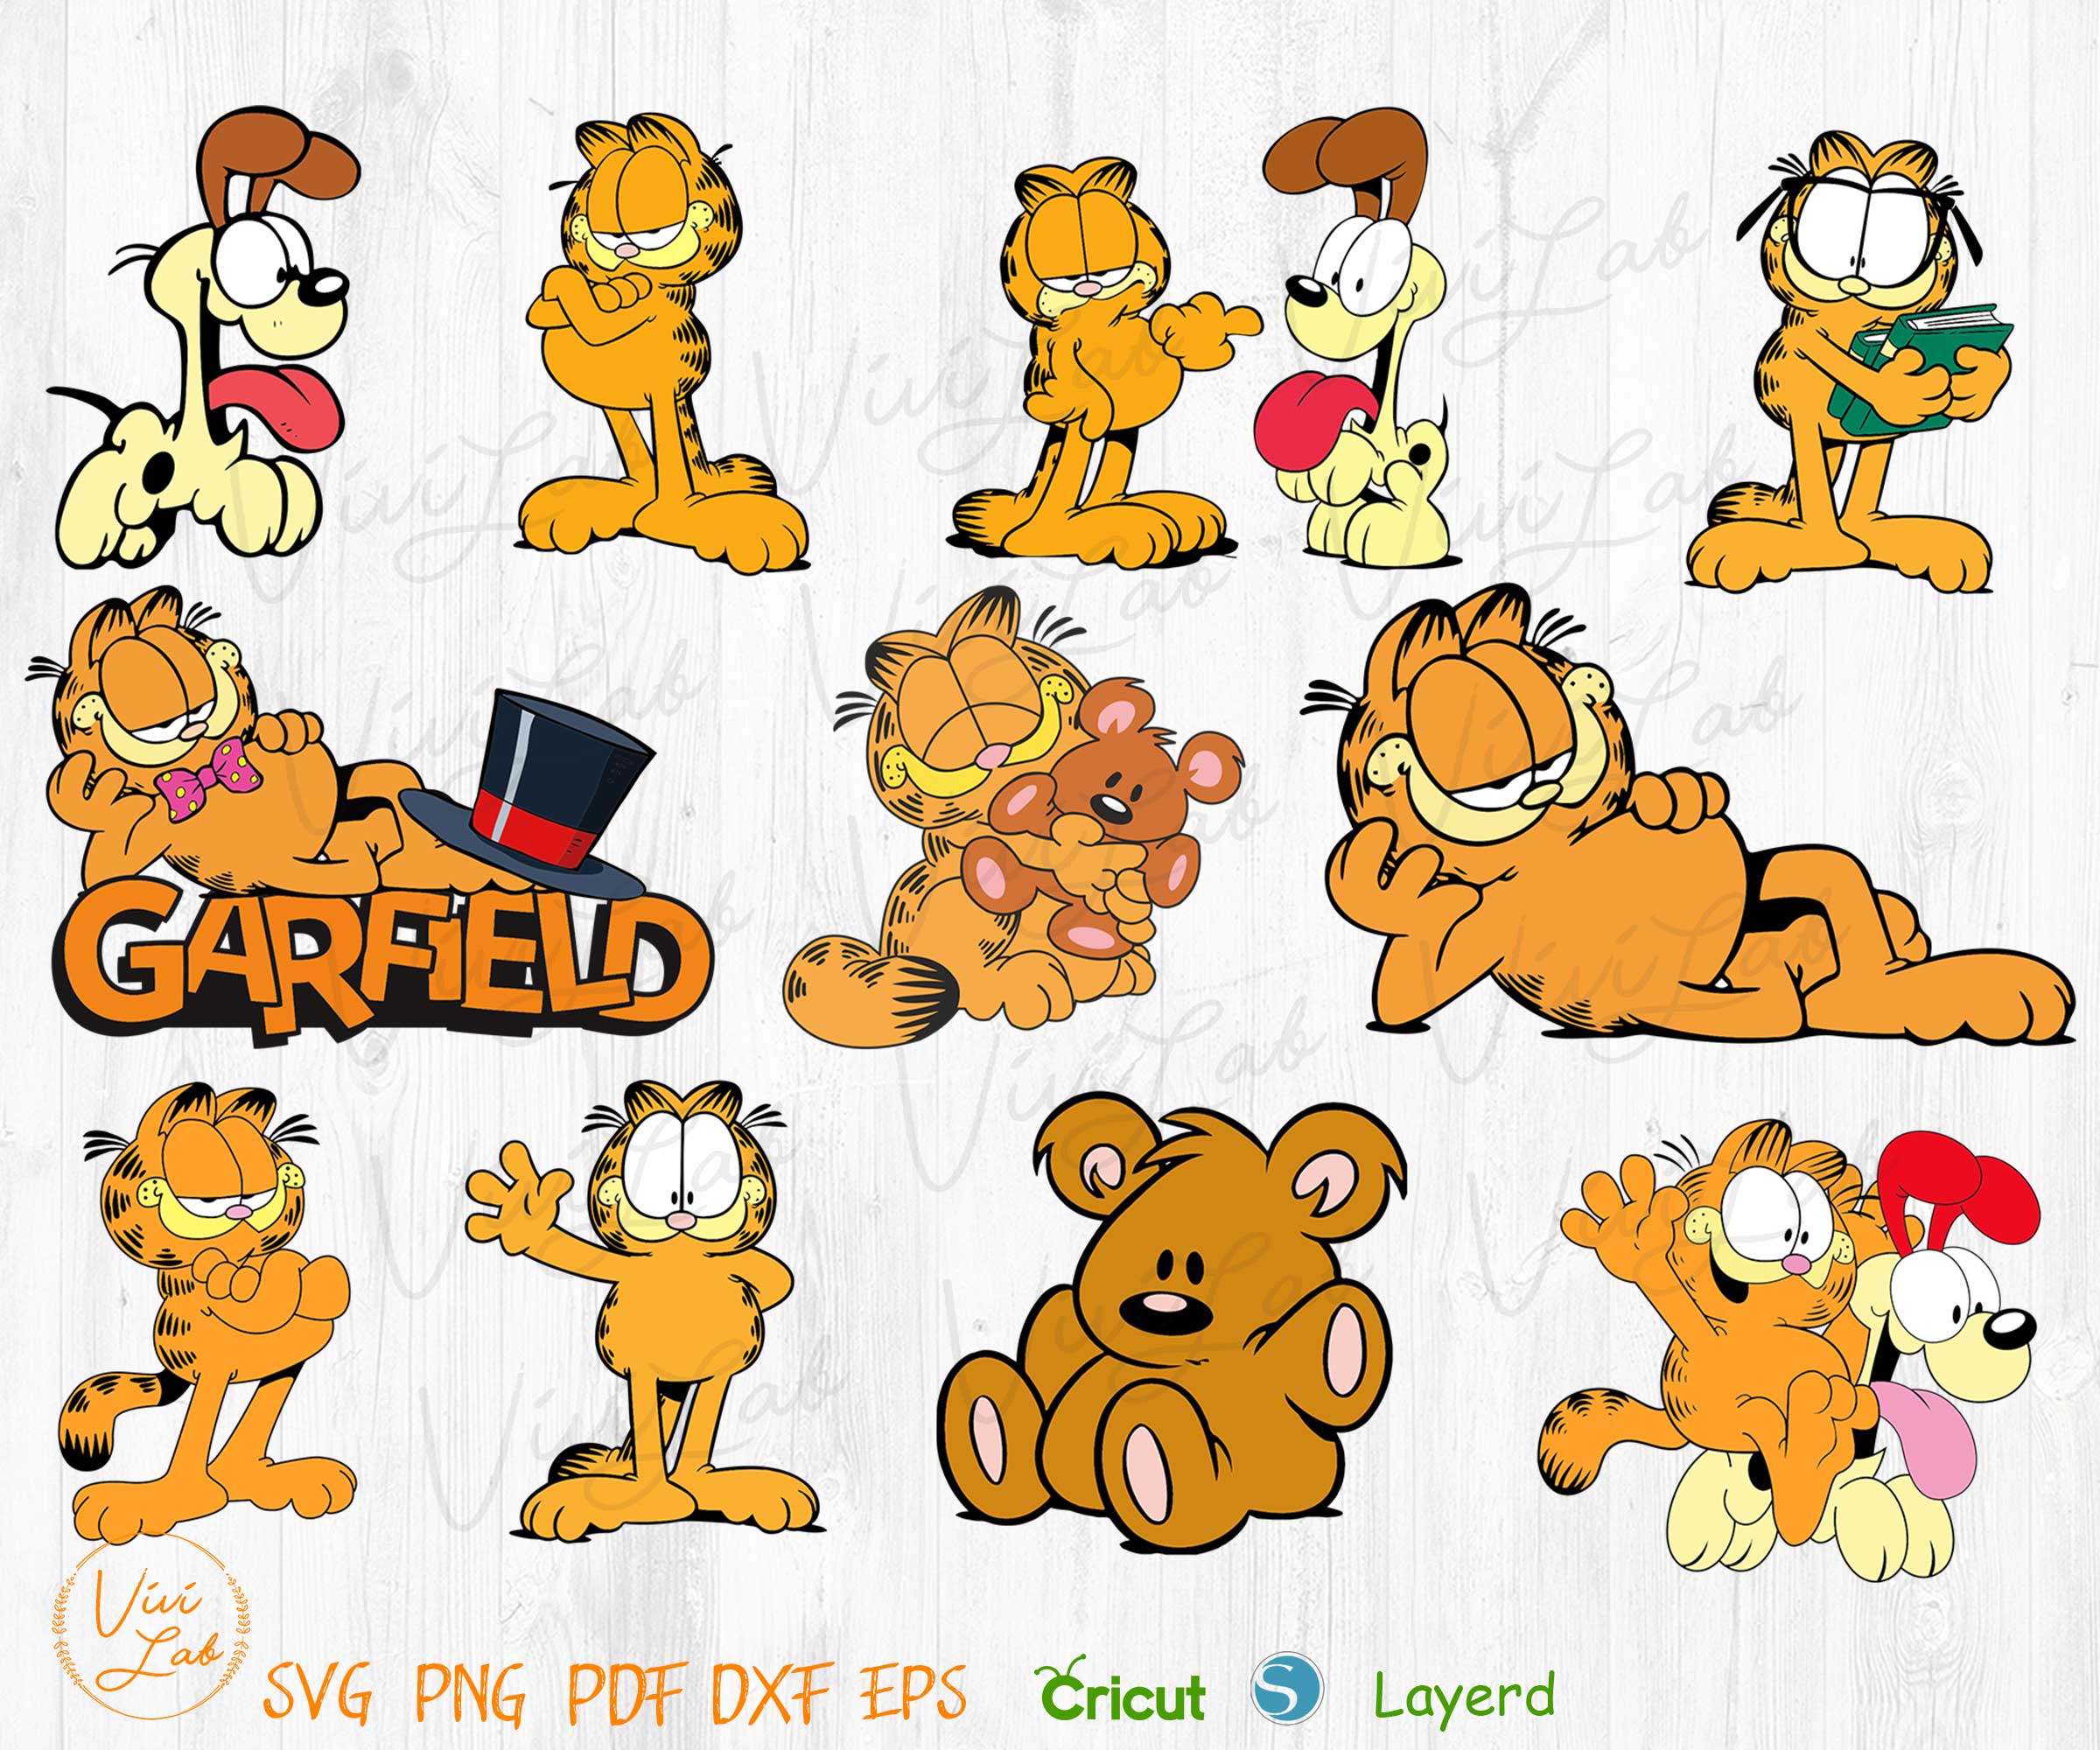 Garfield clipart svg png vector